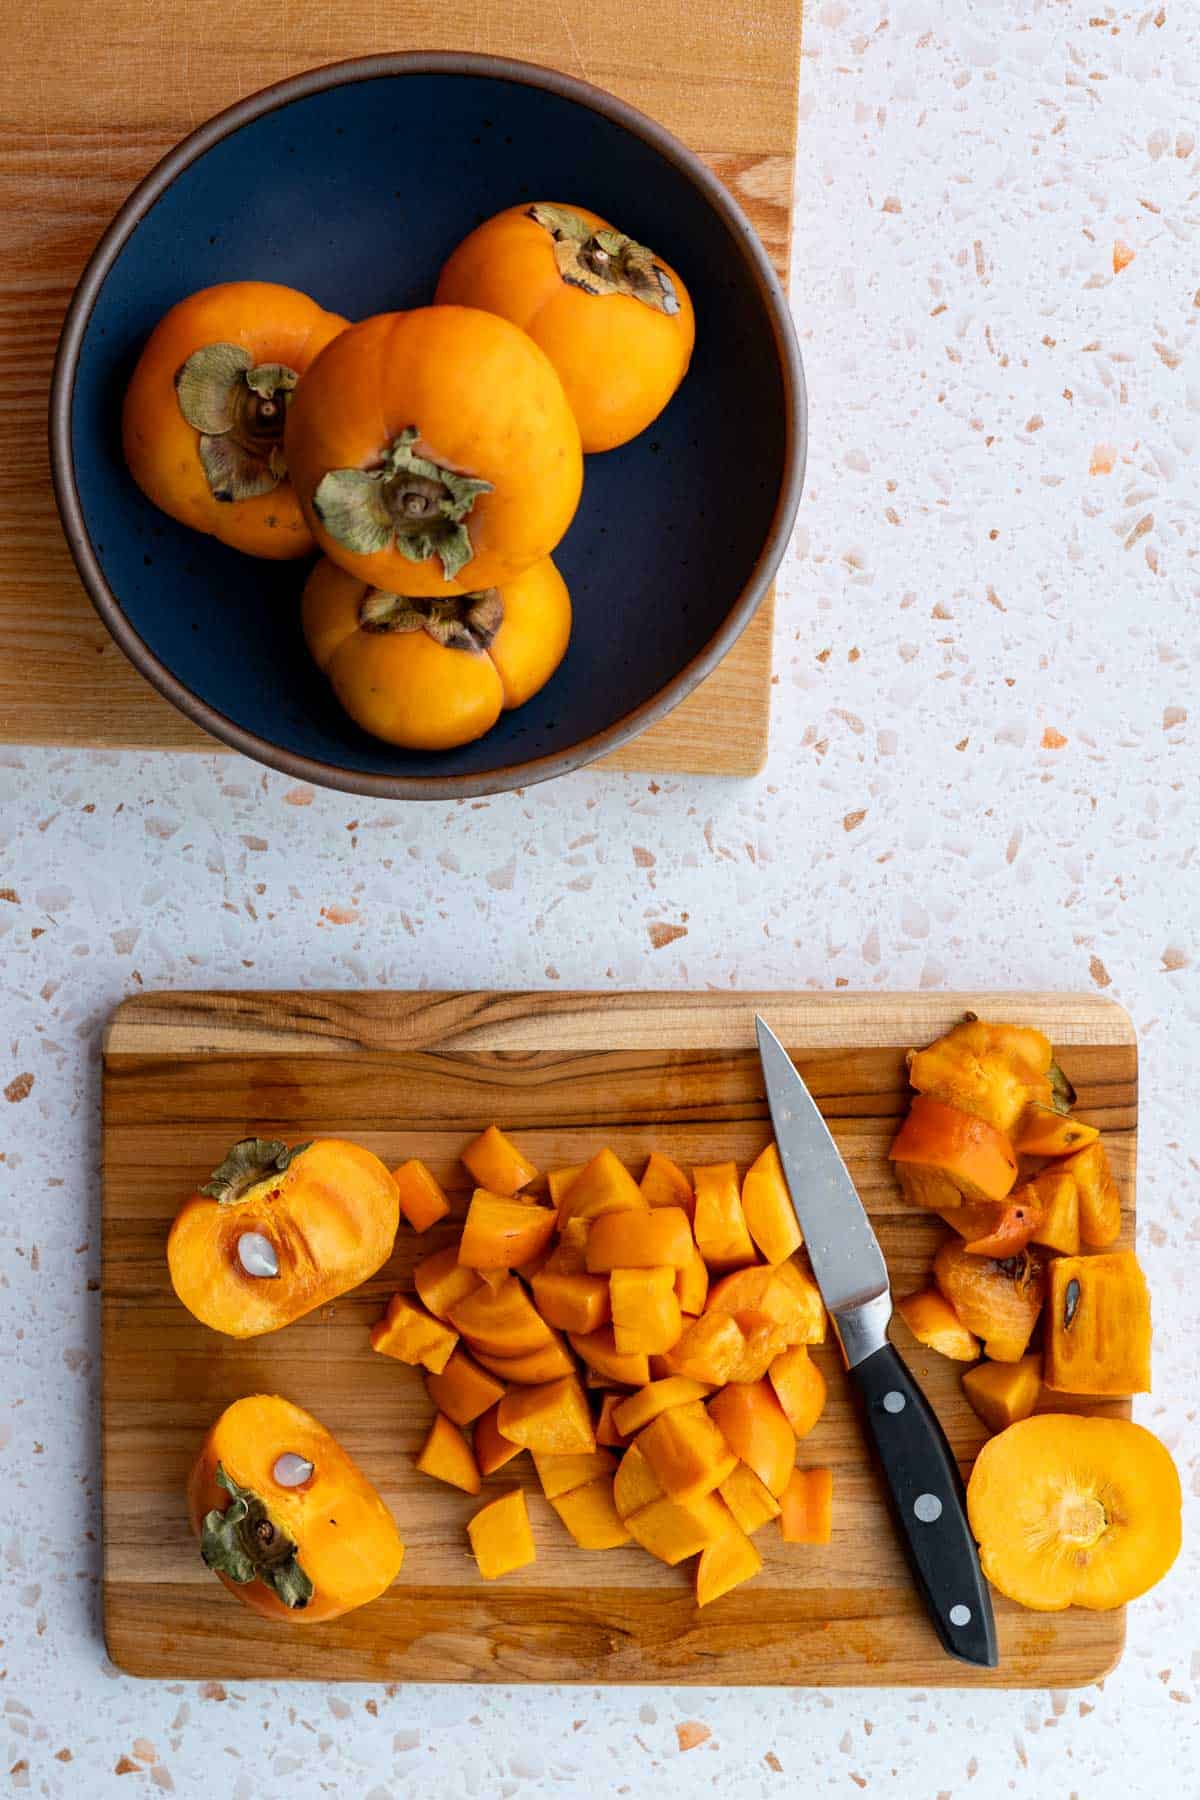 Chopped persimmons are sitting on a cutting board next to a pairing knife.